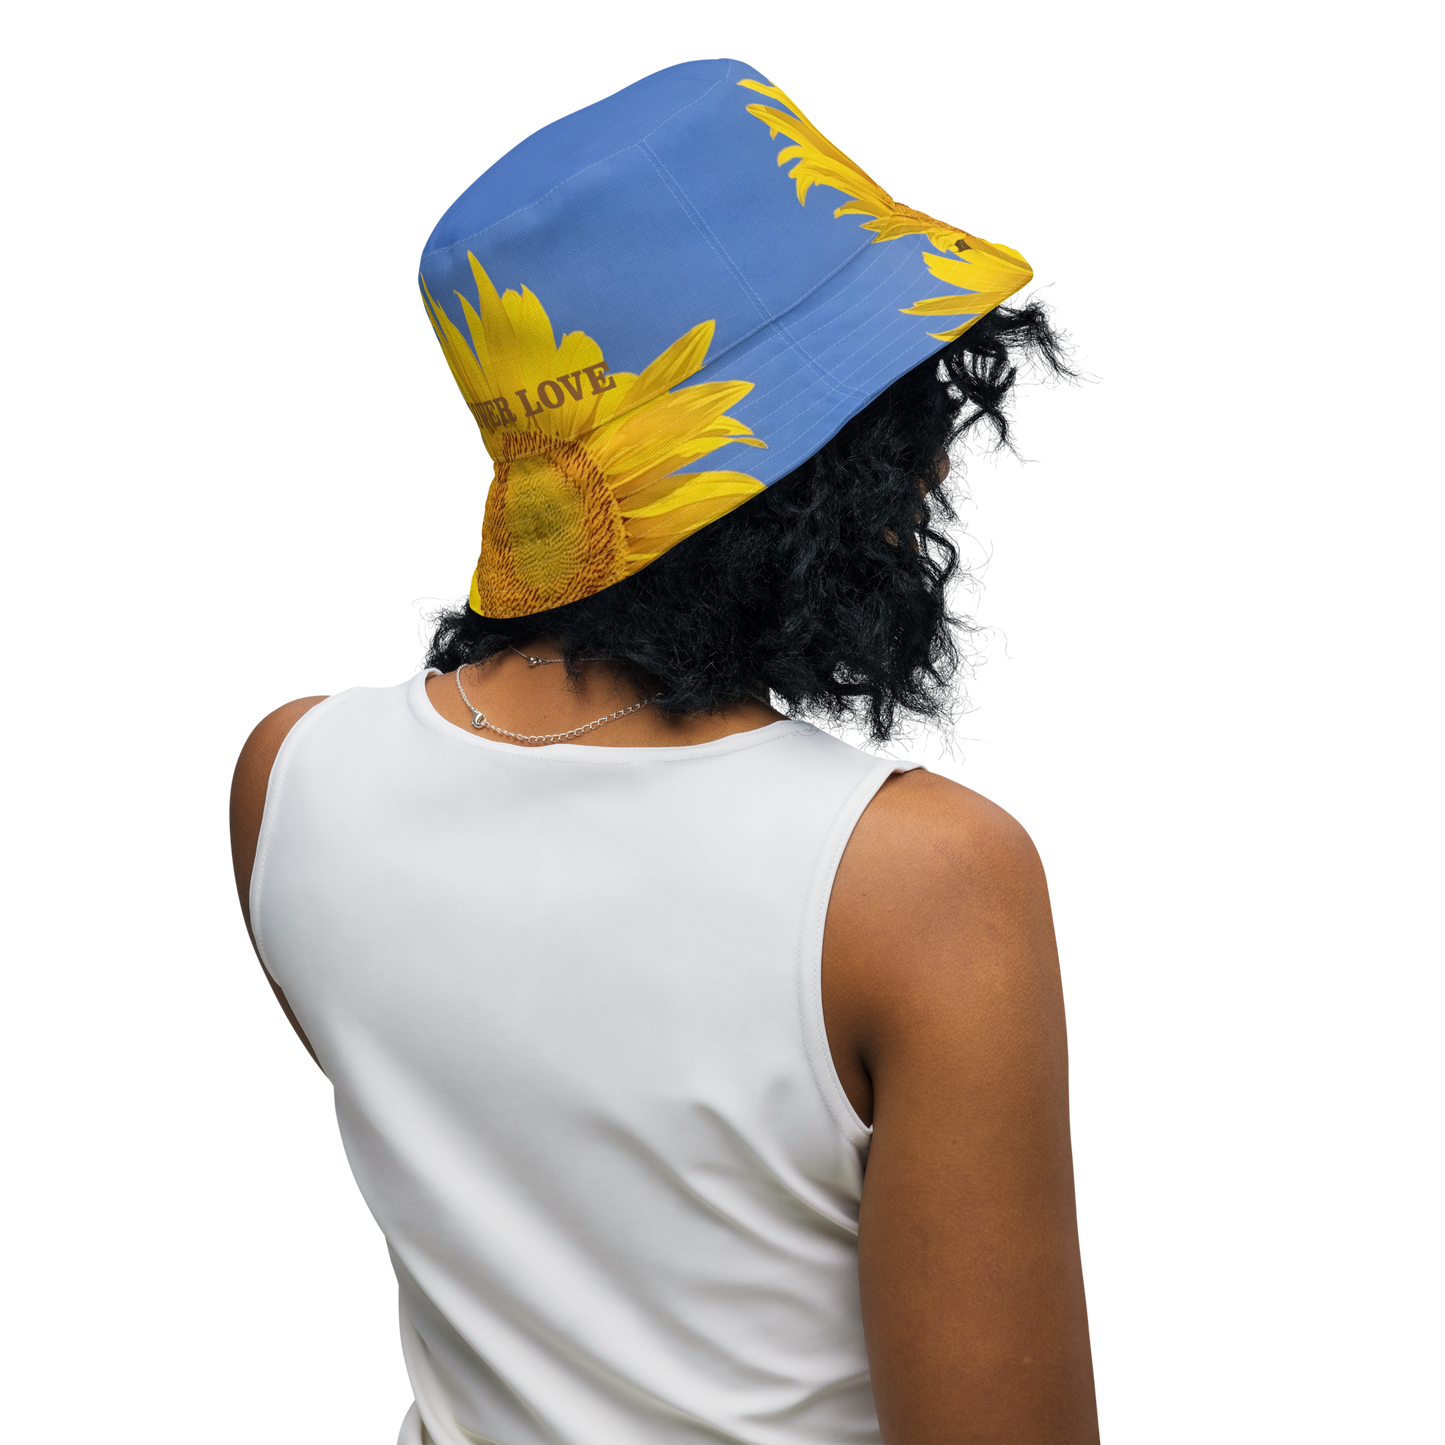 The FLOWER LOVE Collection - "Sunflower Sisters" Design Premium Reversible Bucket Hat - Yellow Inside - Sunflower Hat, Gifts for Her